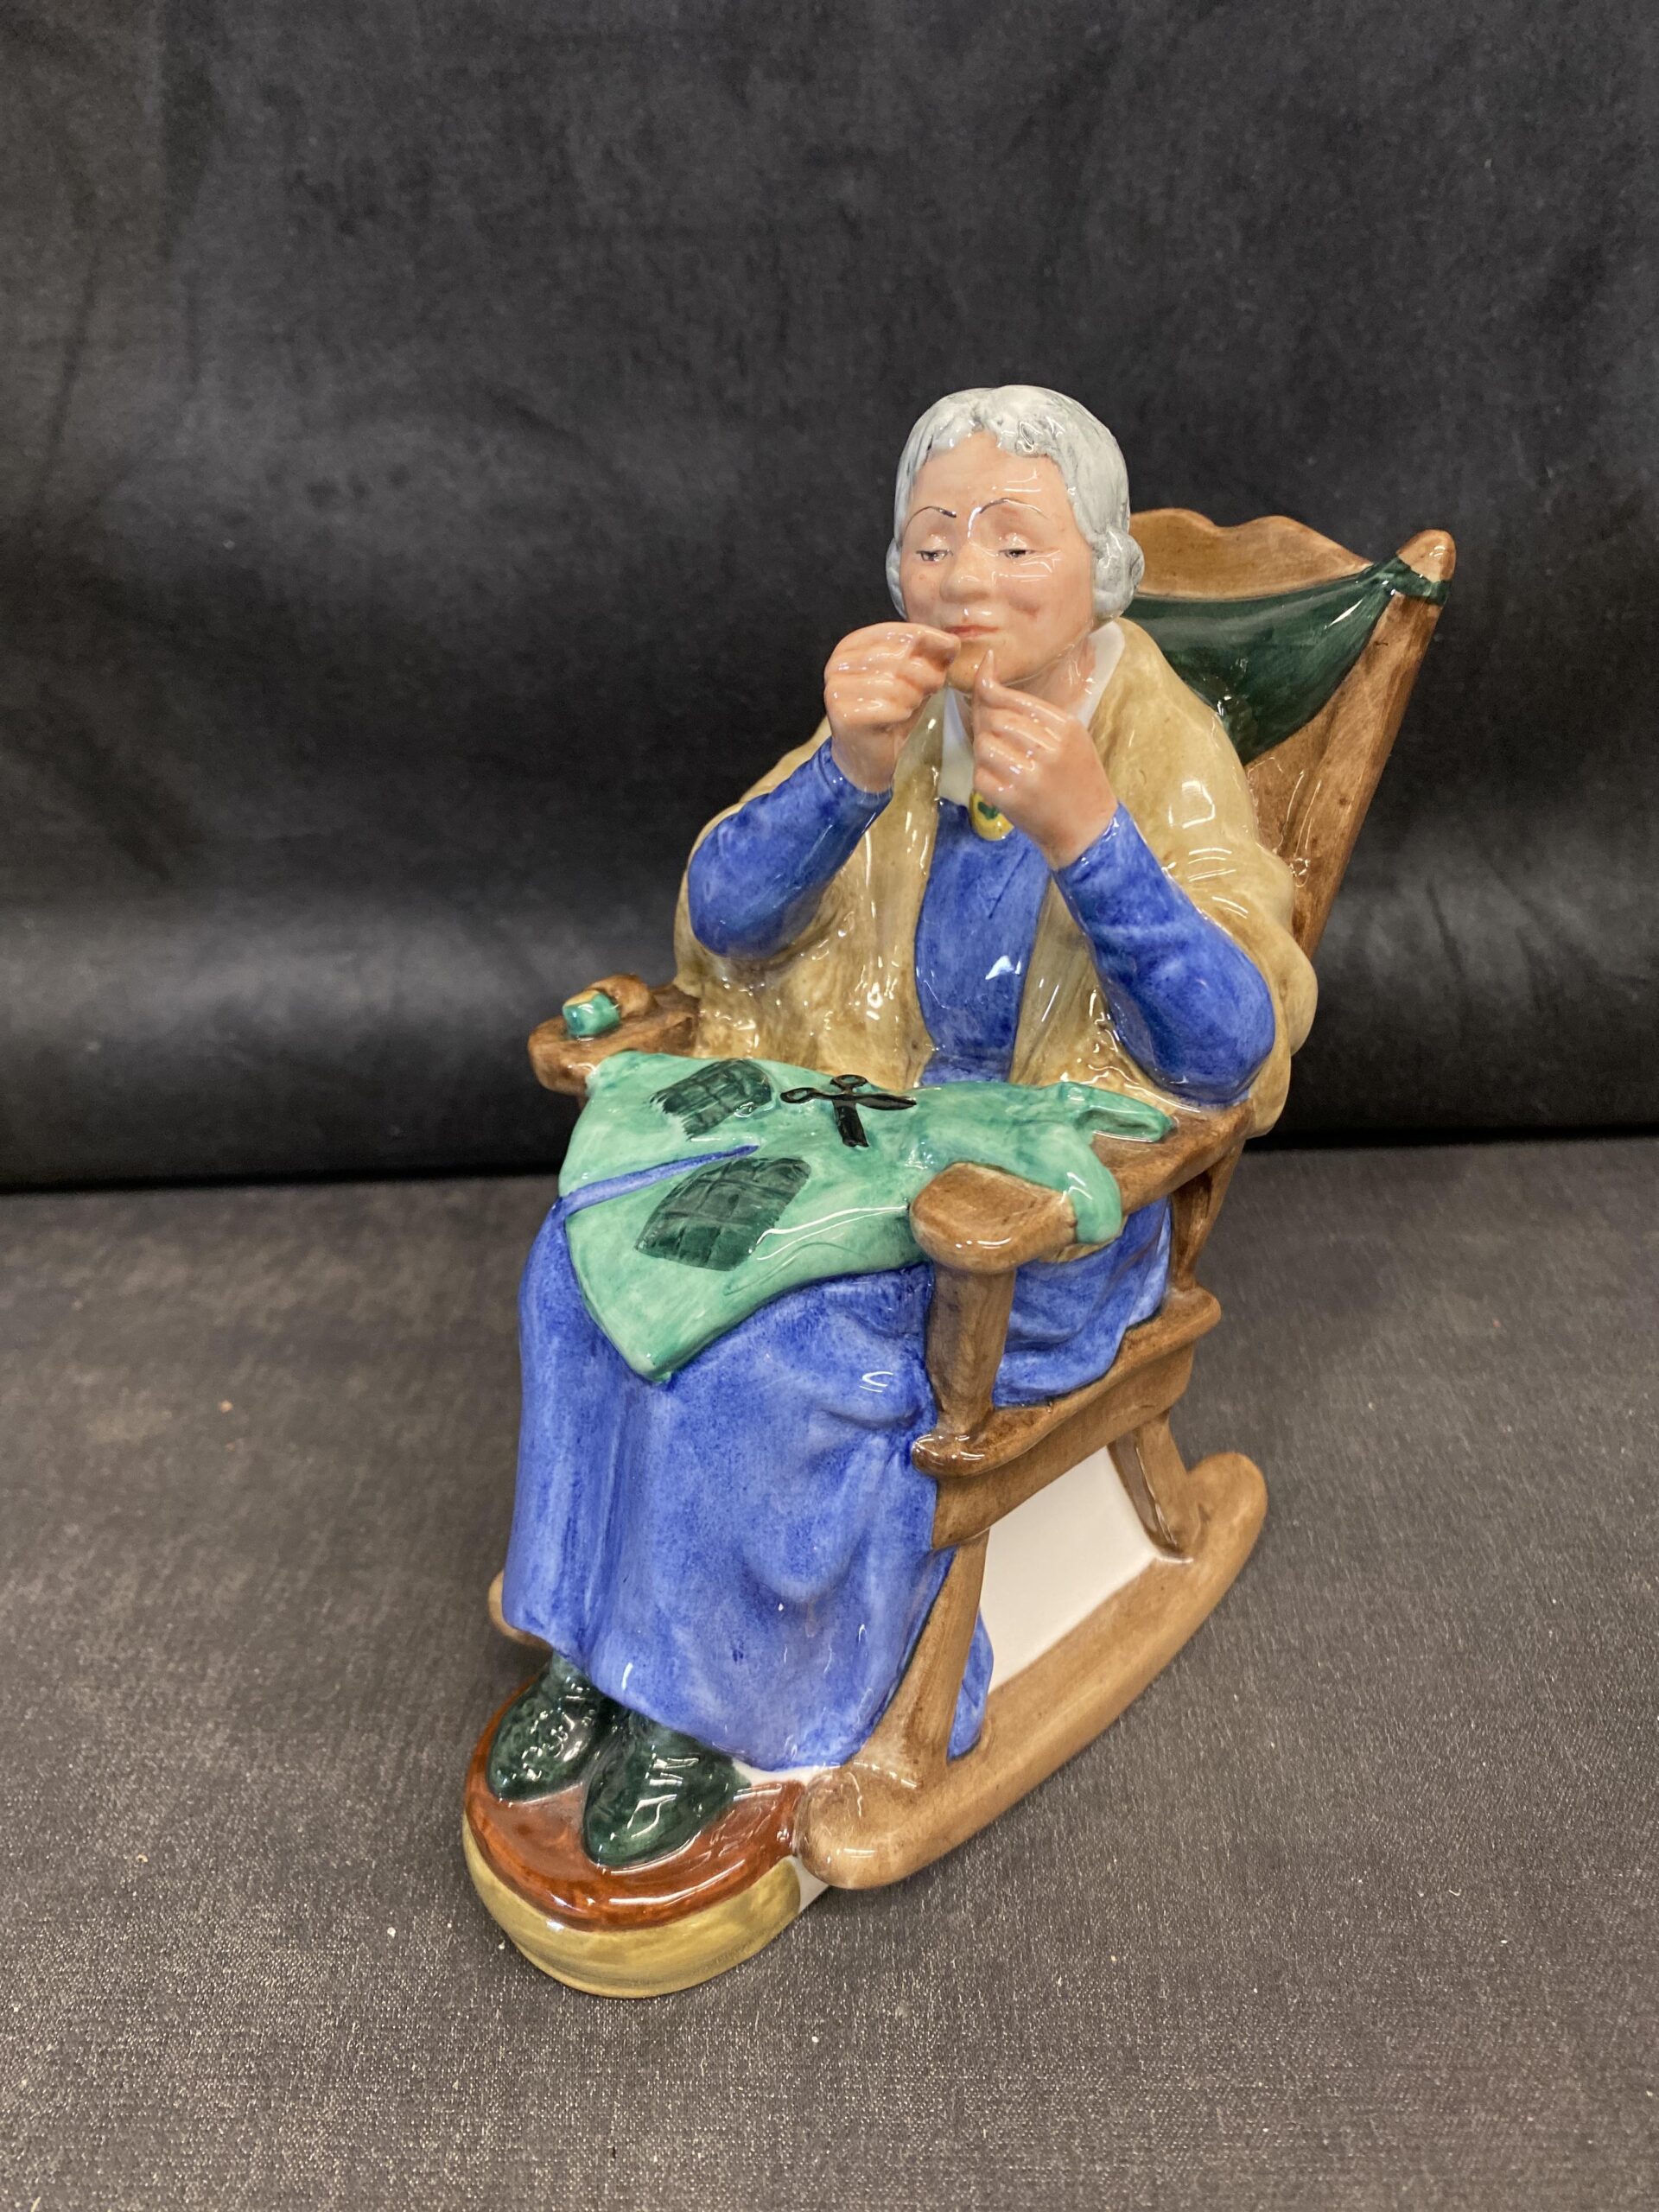 Royal Doulton Figurine “A Stitch In Time”